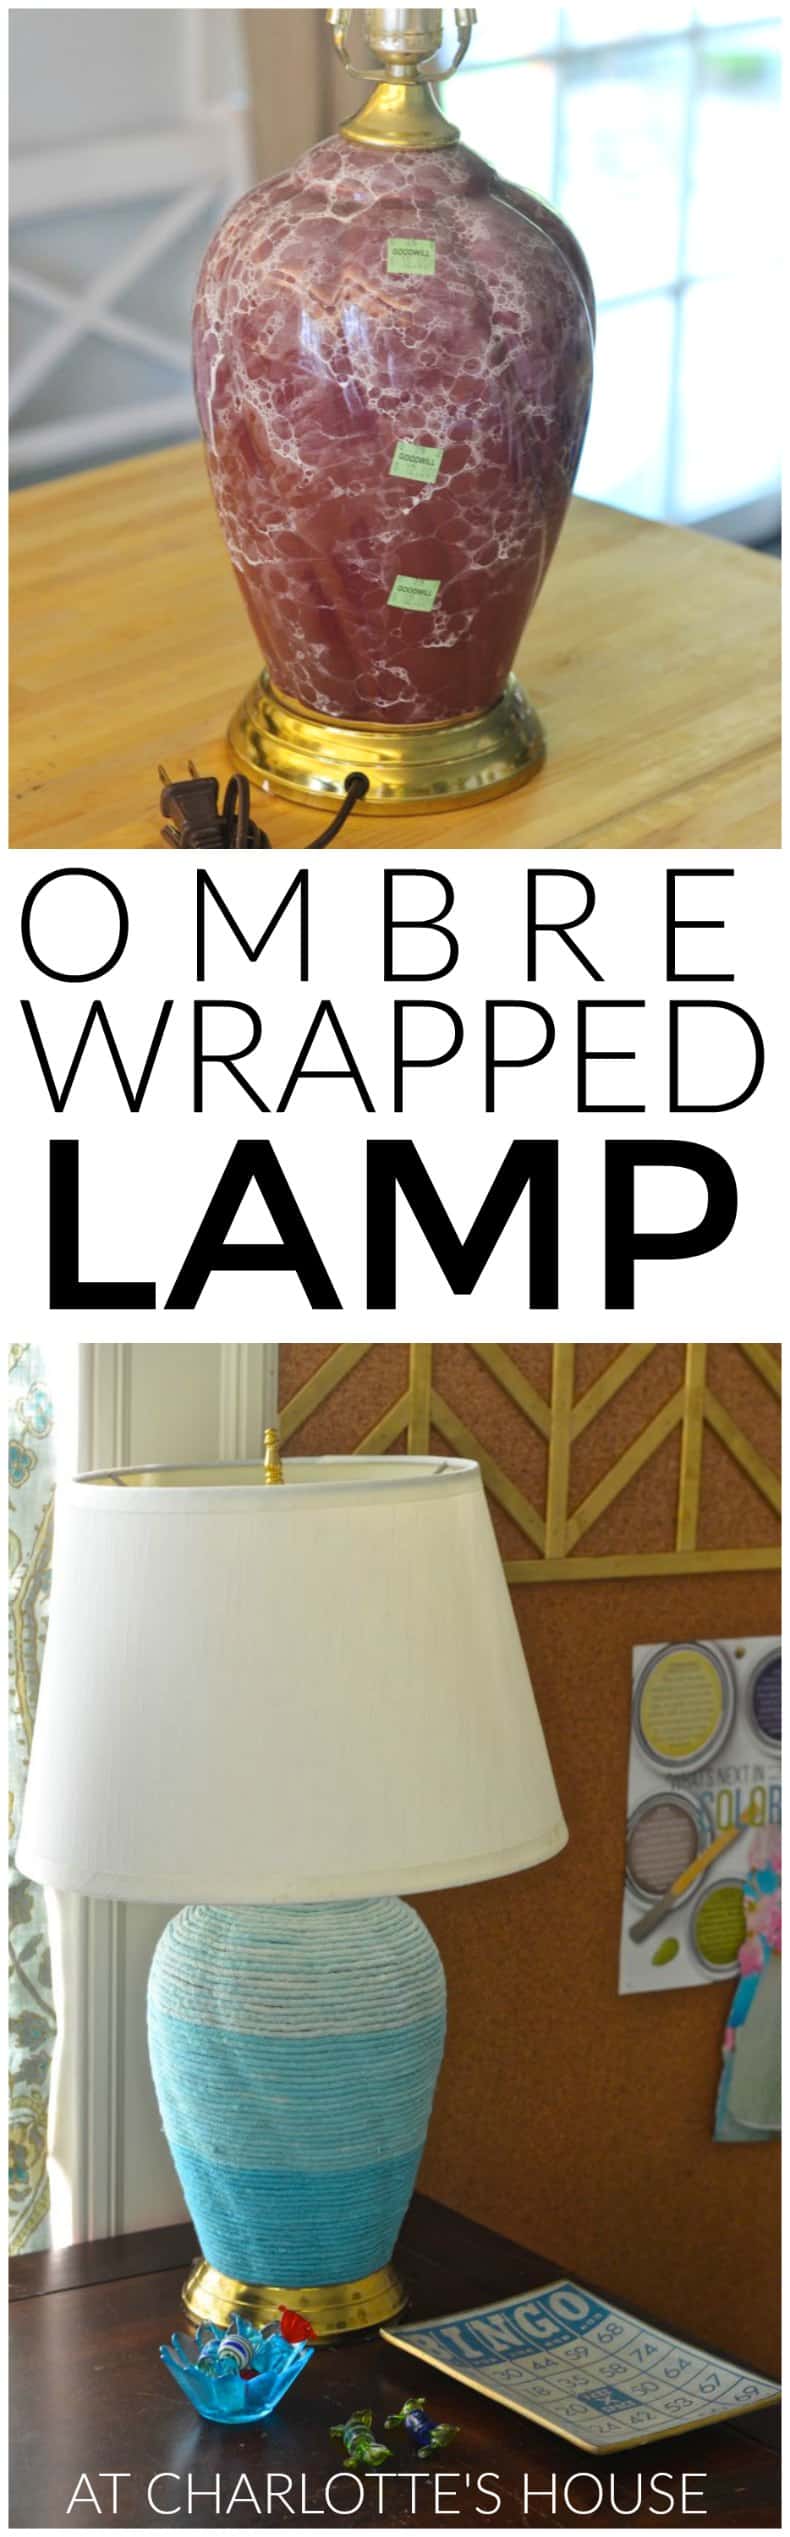 Ombre an ugly thrift store light easily with this fun tutorial.